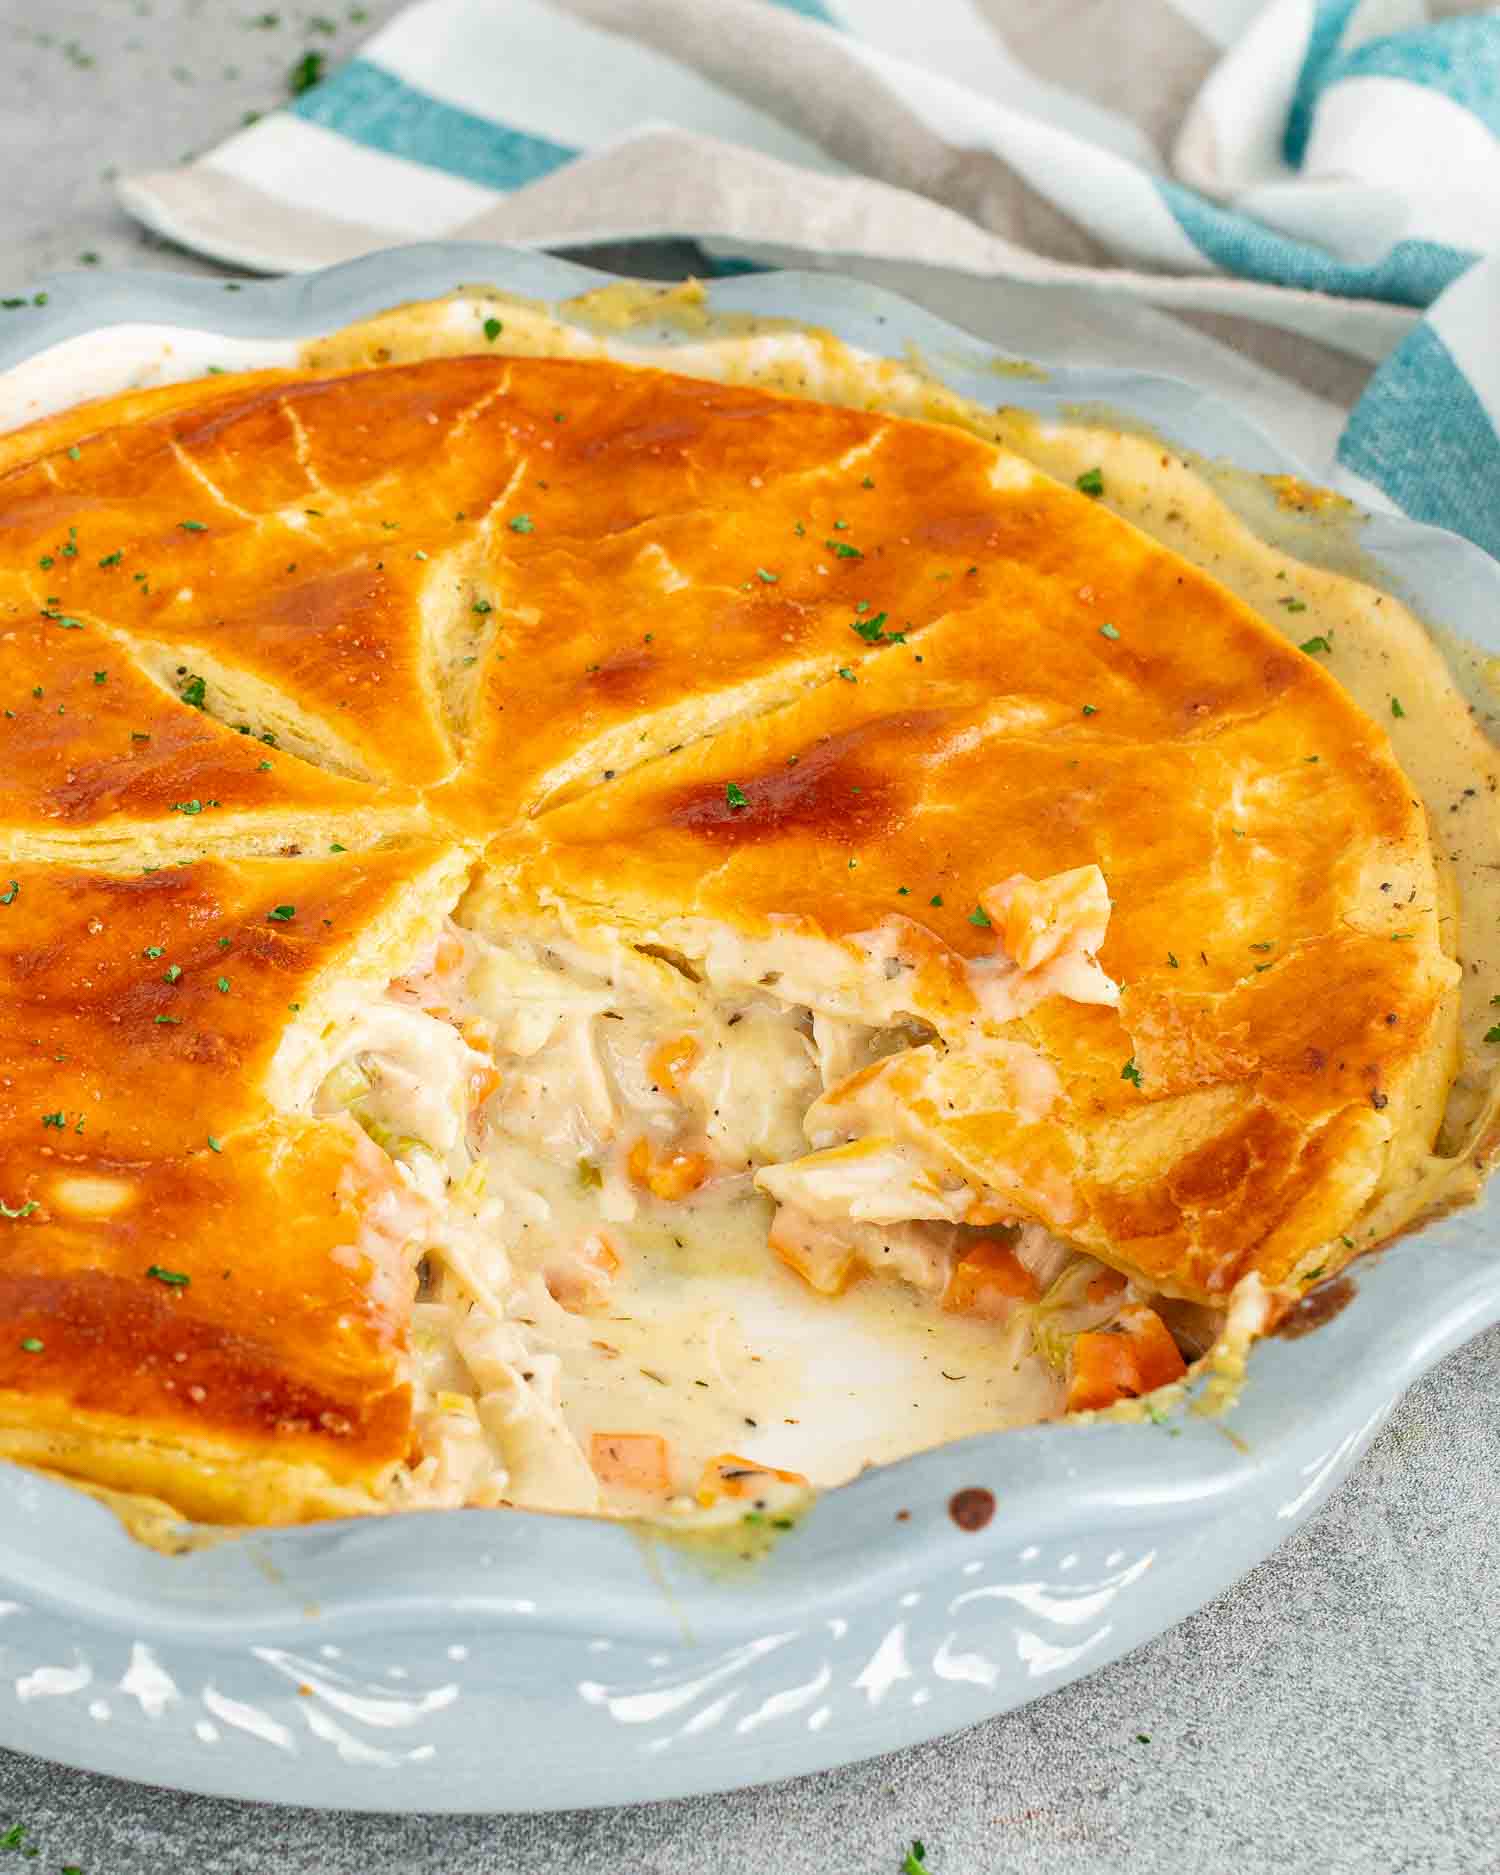 freshly baked chicken and leek pie in a pie dish.